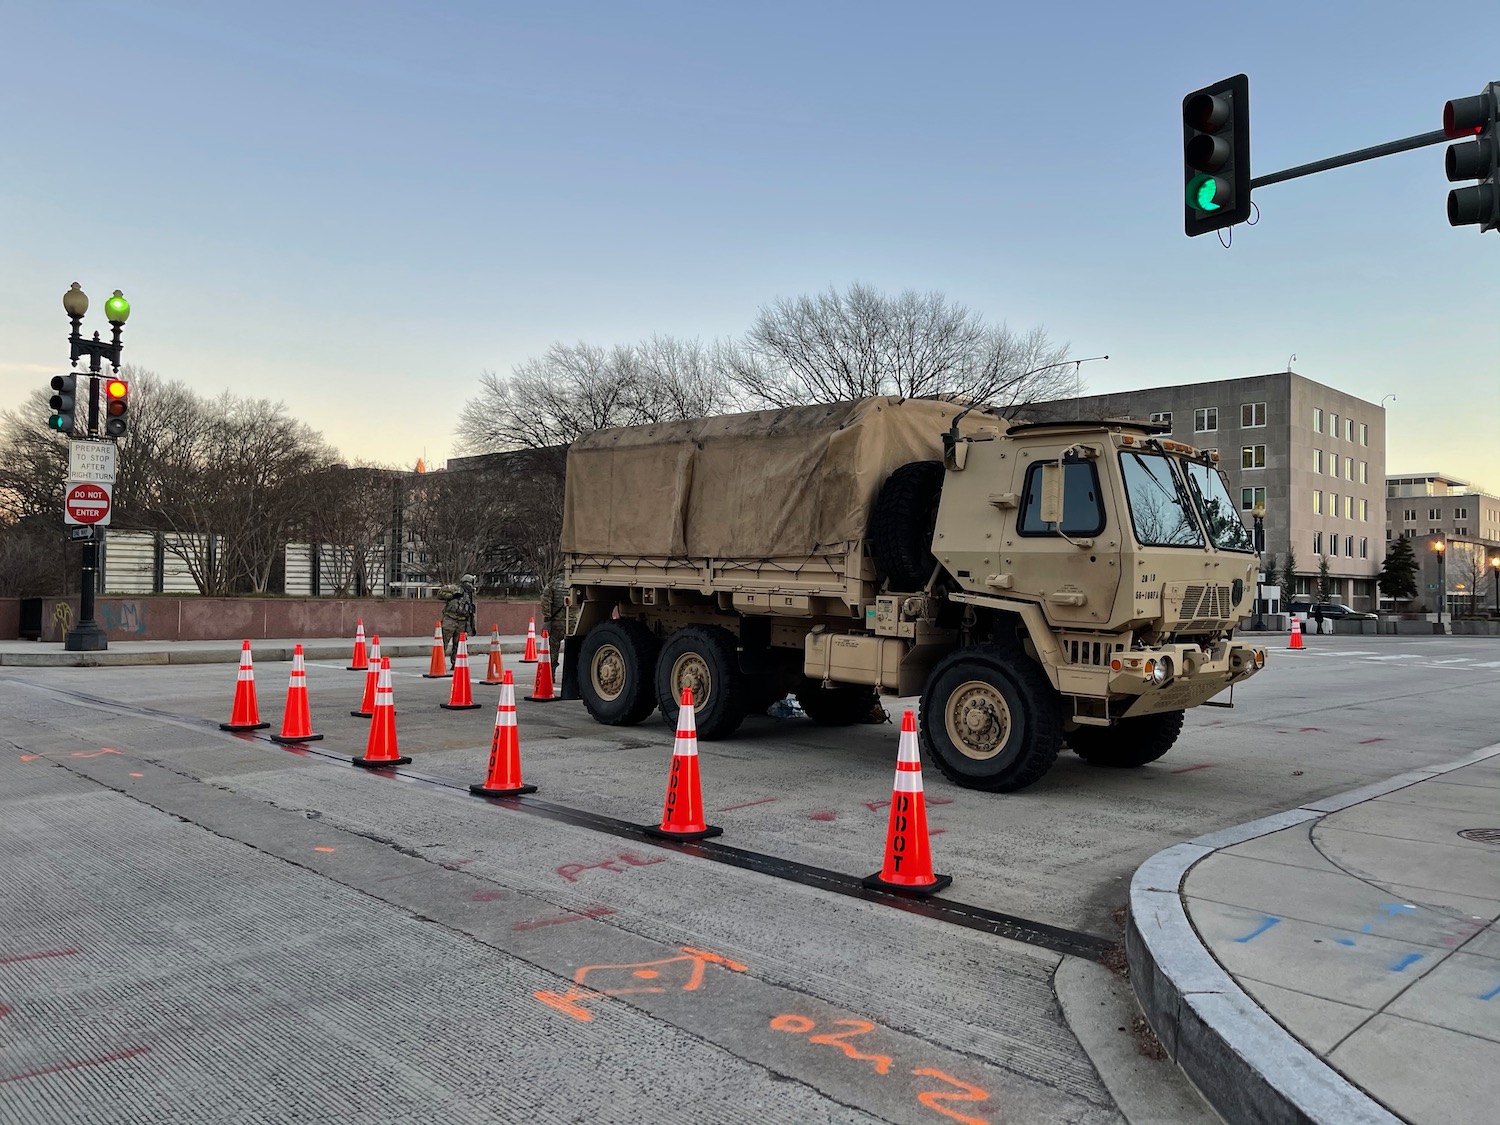 a military truck on a street with traffic cones